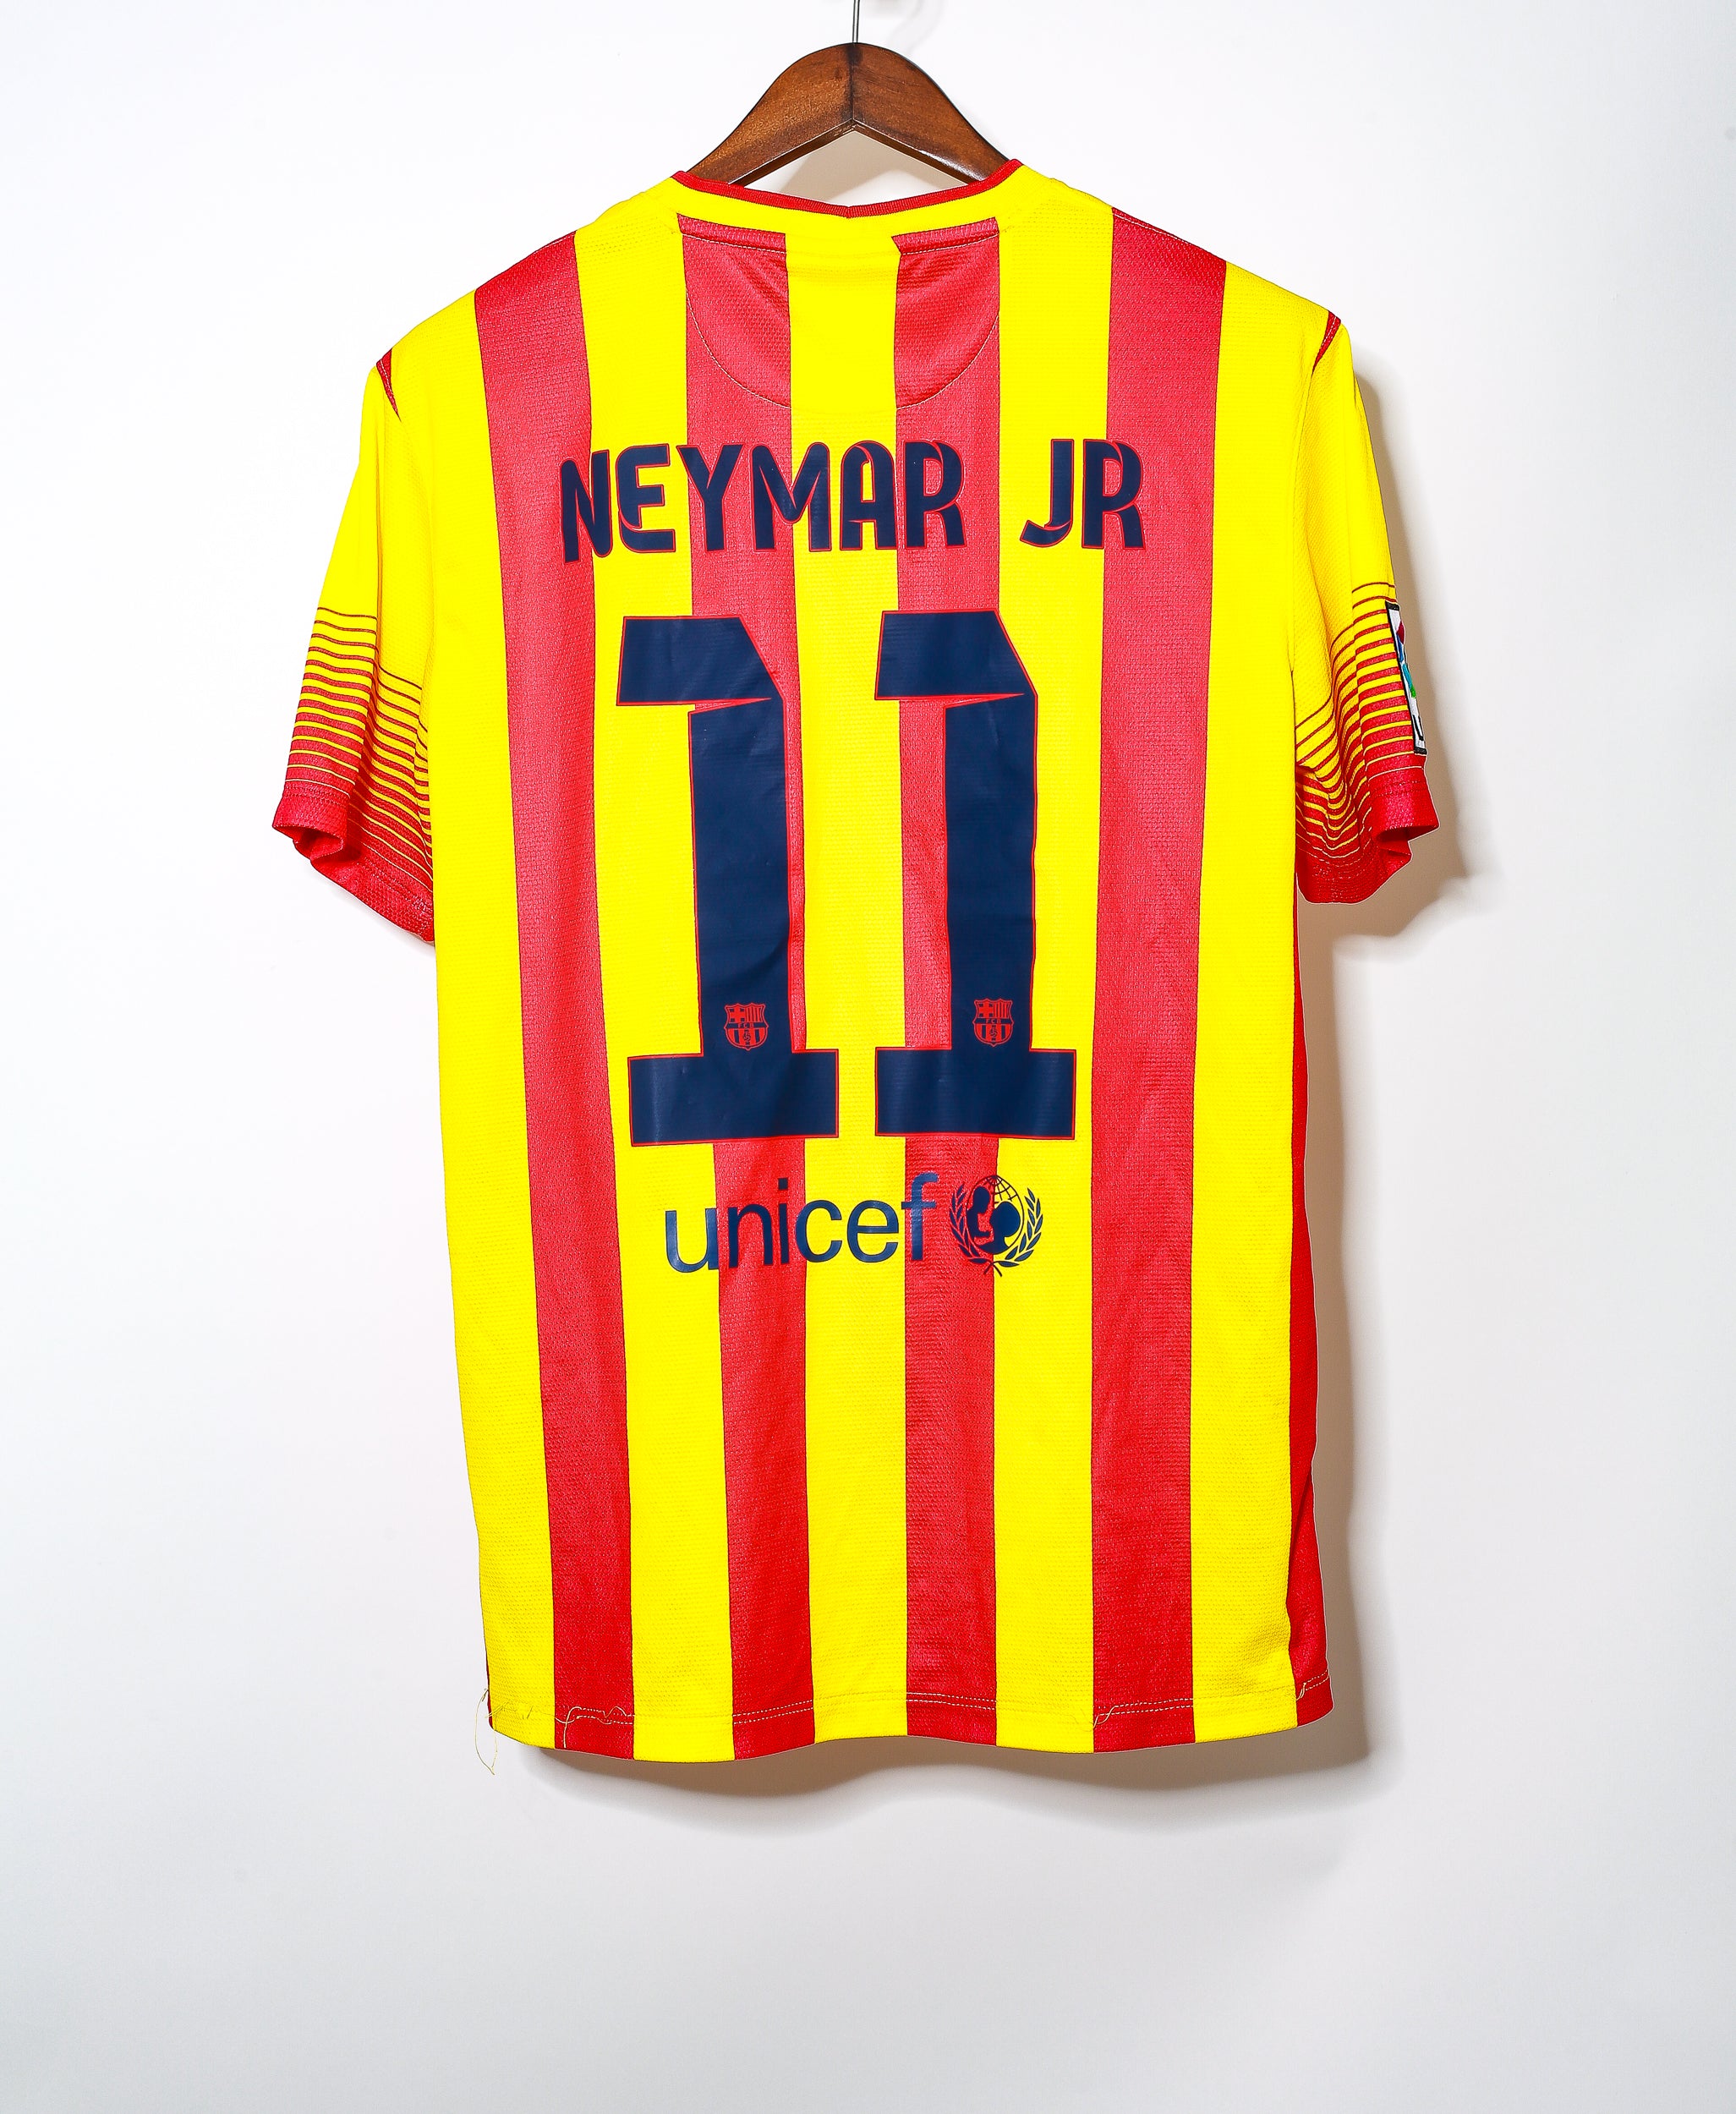 Maillot vintage 2013 / 2014 - Barcelone - Neymar #11 (M) - Back To The  Football